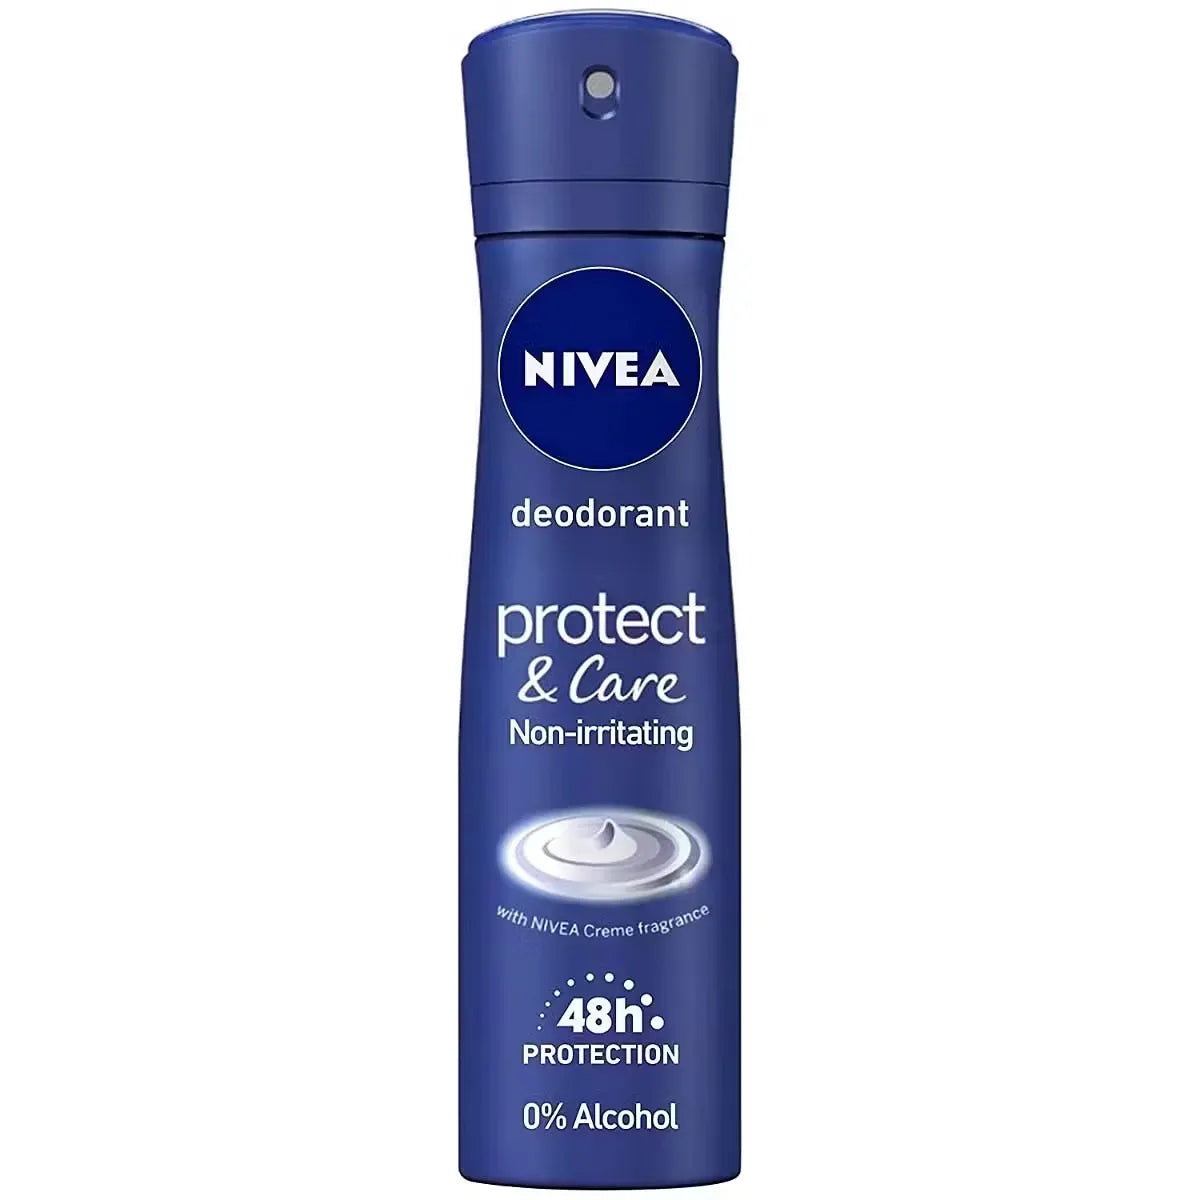 Nivea Protect & Care Deodorant spray bottle (150ml) with blue and white design. Woman smiling and raising her arms with fresh scent visuals around her.